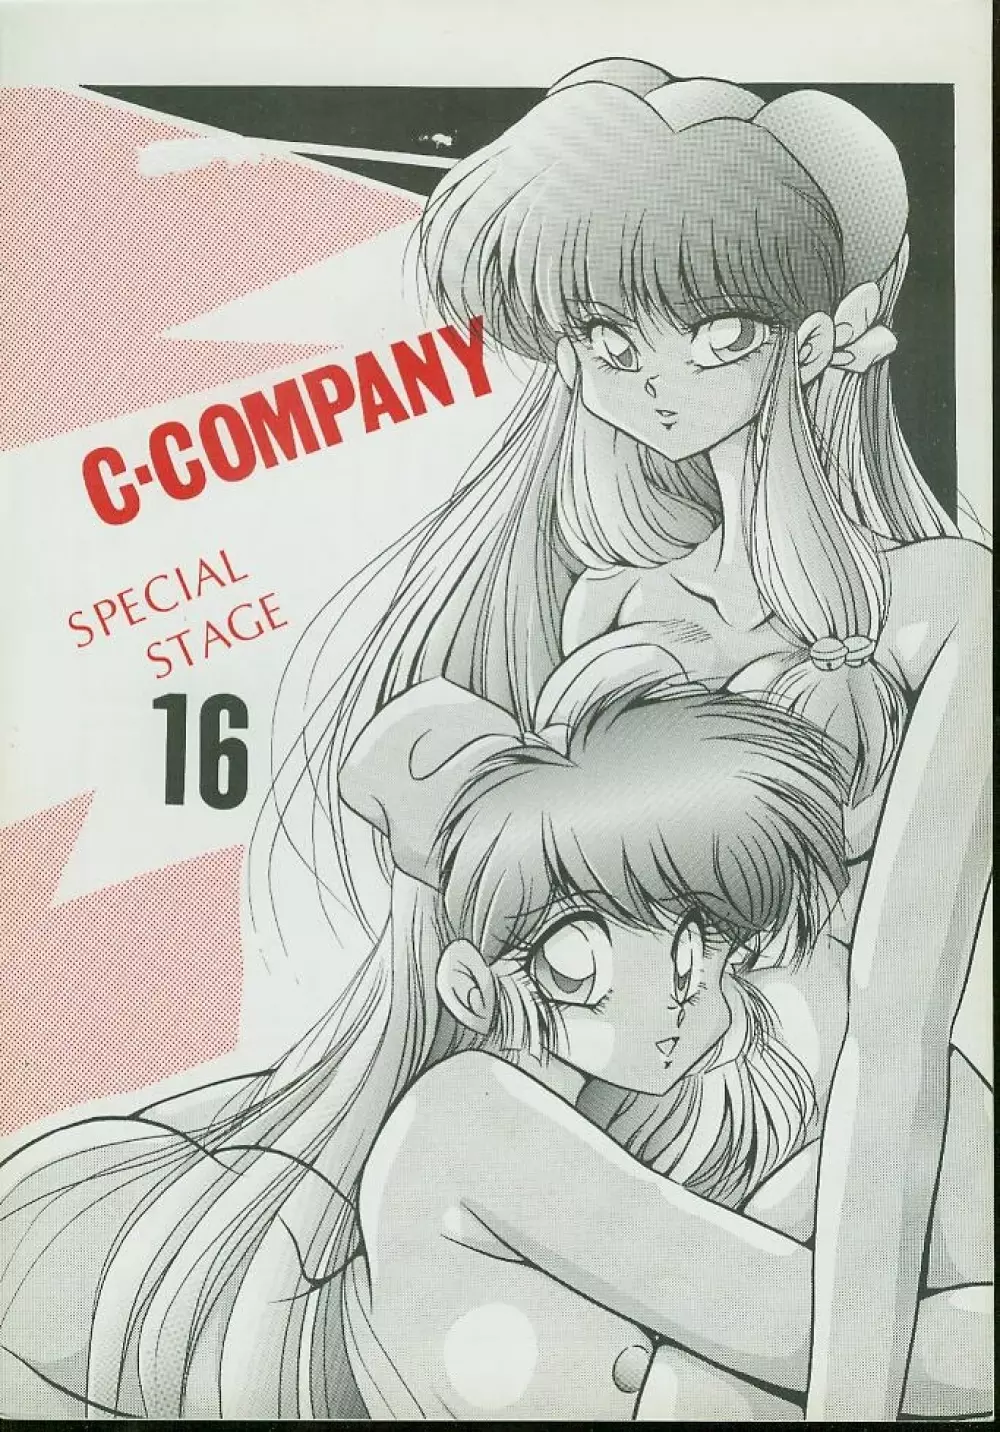 C-Company Special Stage 16